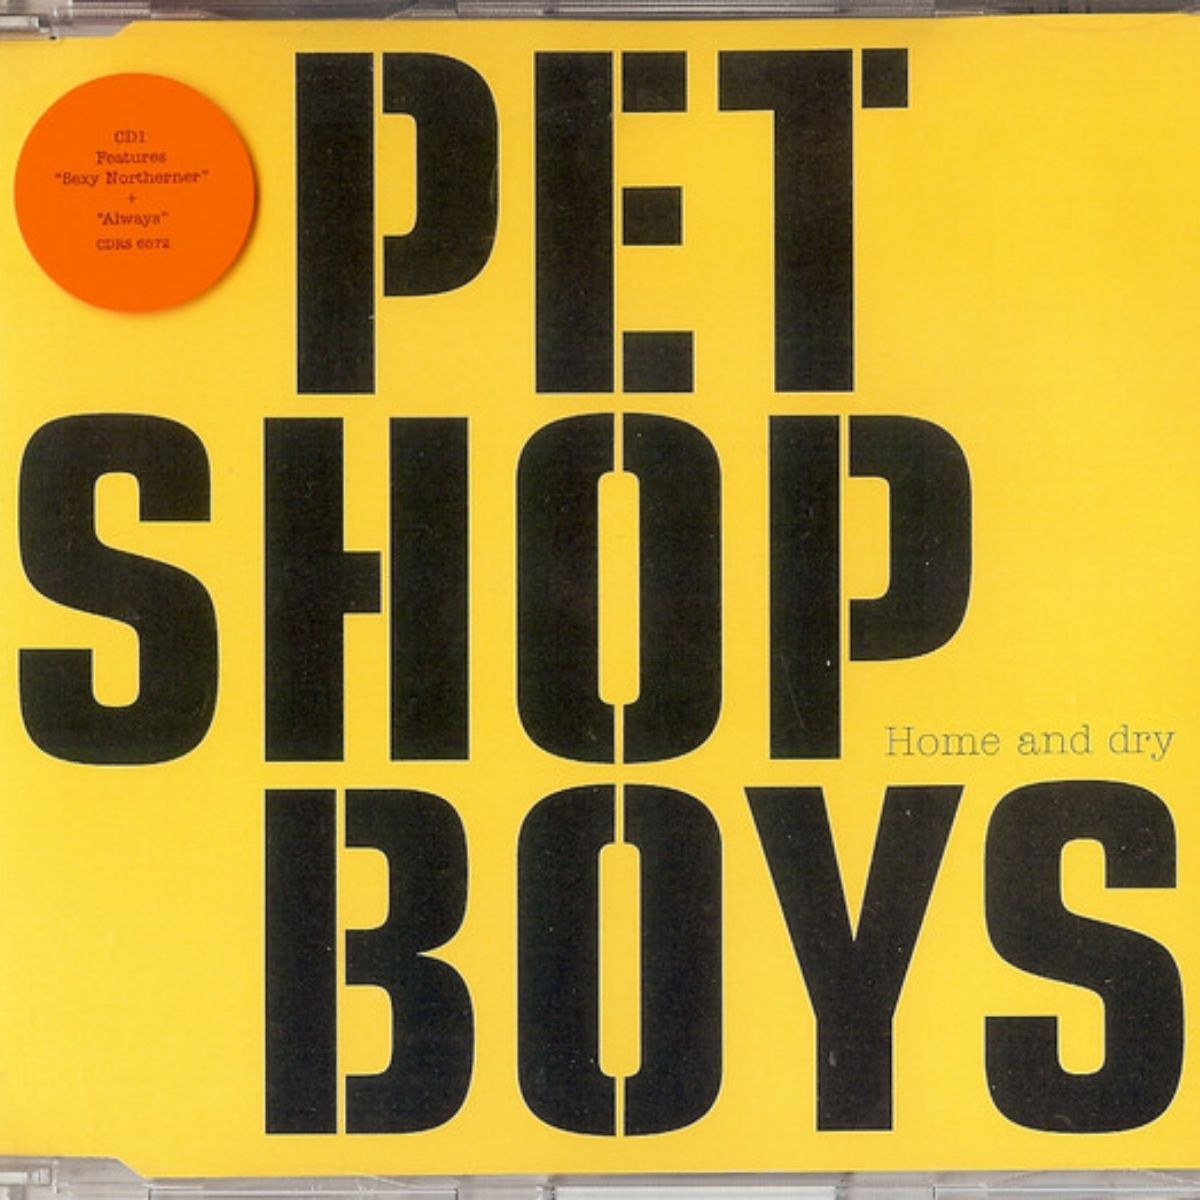 Cover for "Home and Dry" single "Pet Shop Boys" 